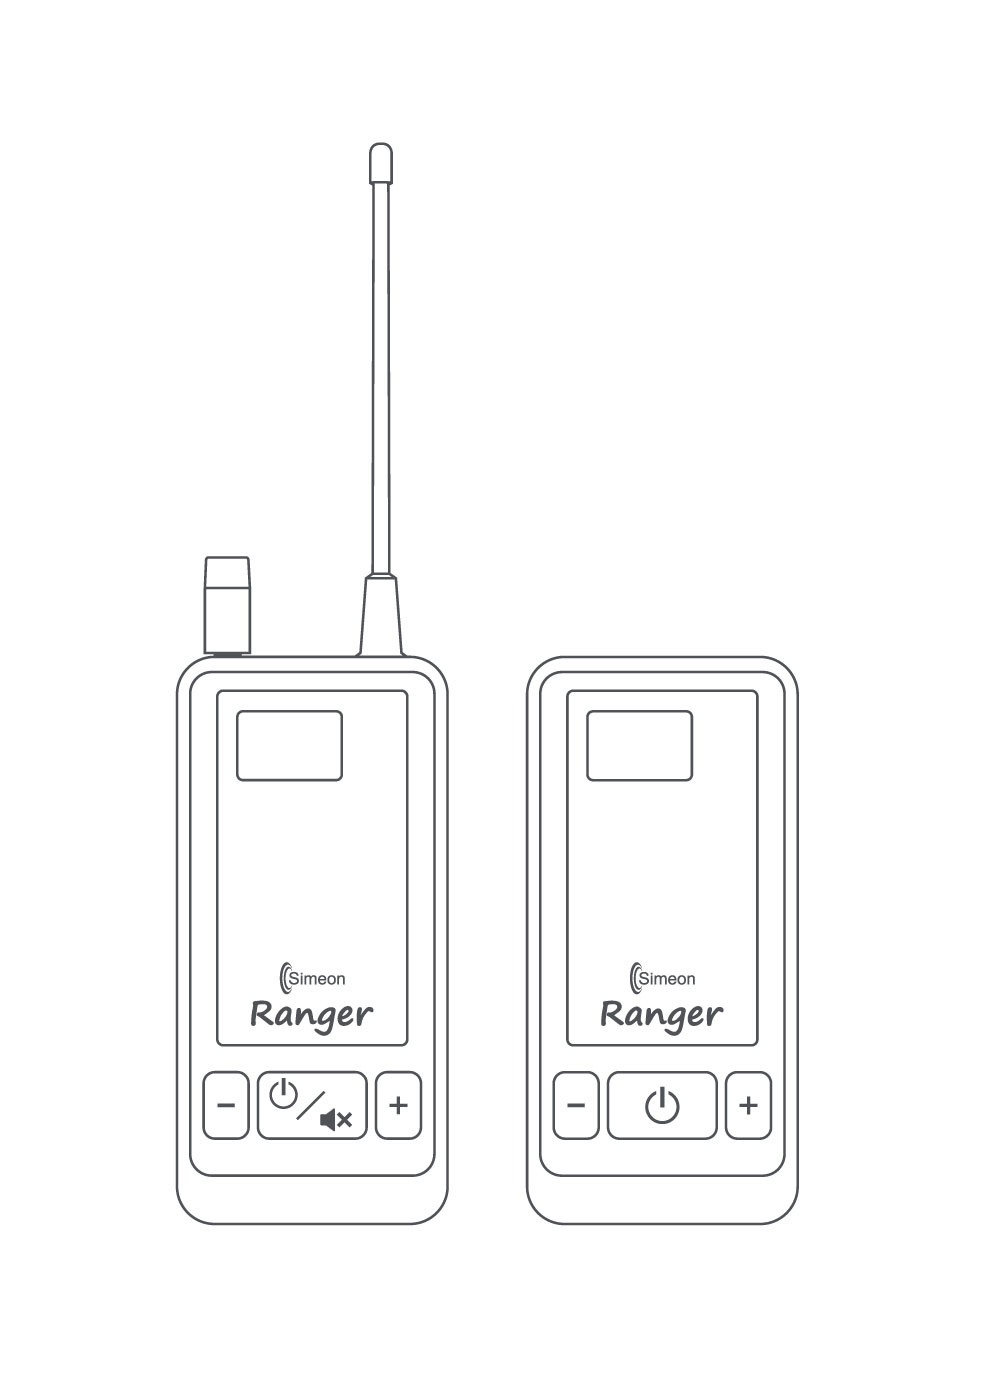 Simeon Ranger is a personal fm device for listeners. It is a wireless personal fm. Great for individuals with hearing loss, hard of hearing and or hearing difficulties.